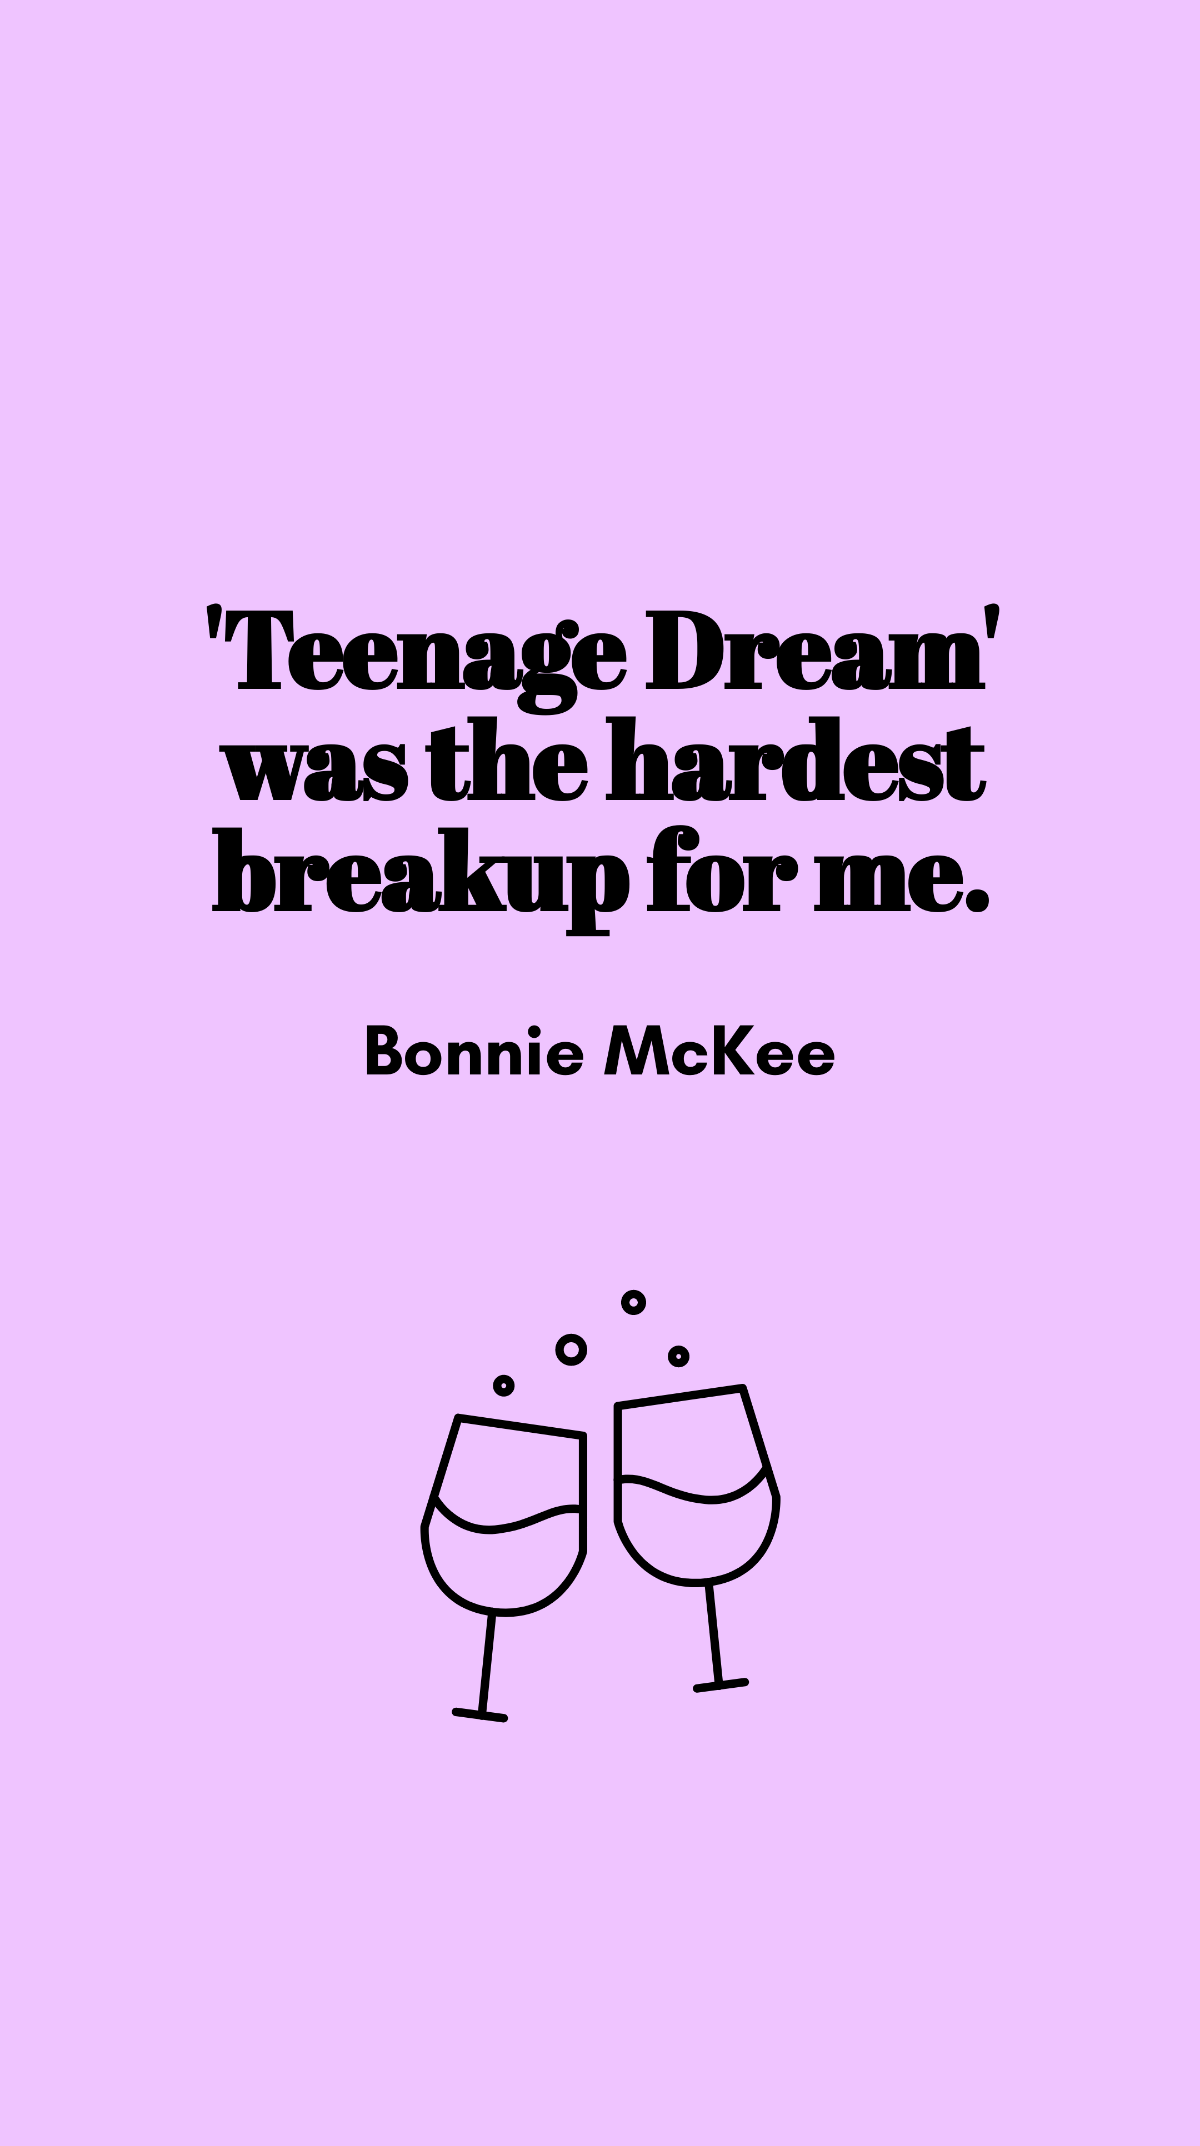 Free Bonnie McKee - 'Teenage Dream' was the hardest breakup for me. Template